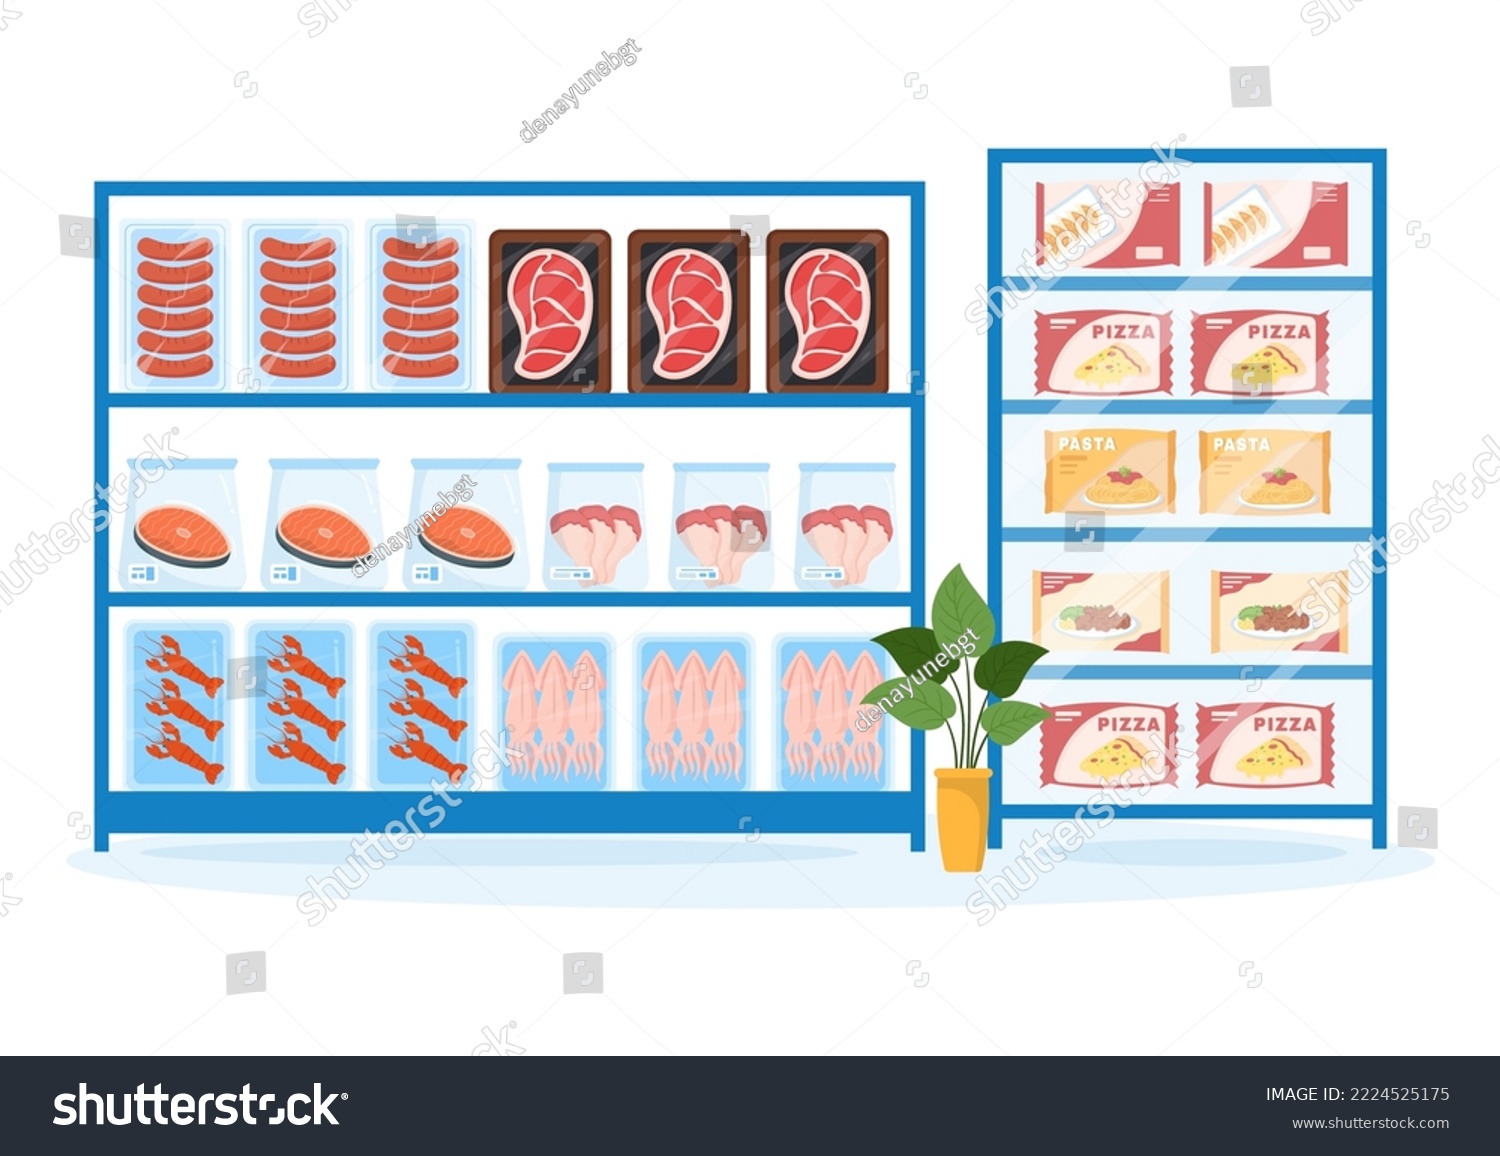 SVG of Frozen Food Store with Products Vacuumed using Foil and Pouch Packaging to be Fresh in Hand Drawn Cartoon Template Illustration svg